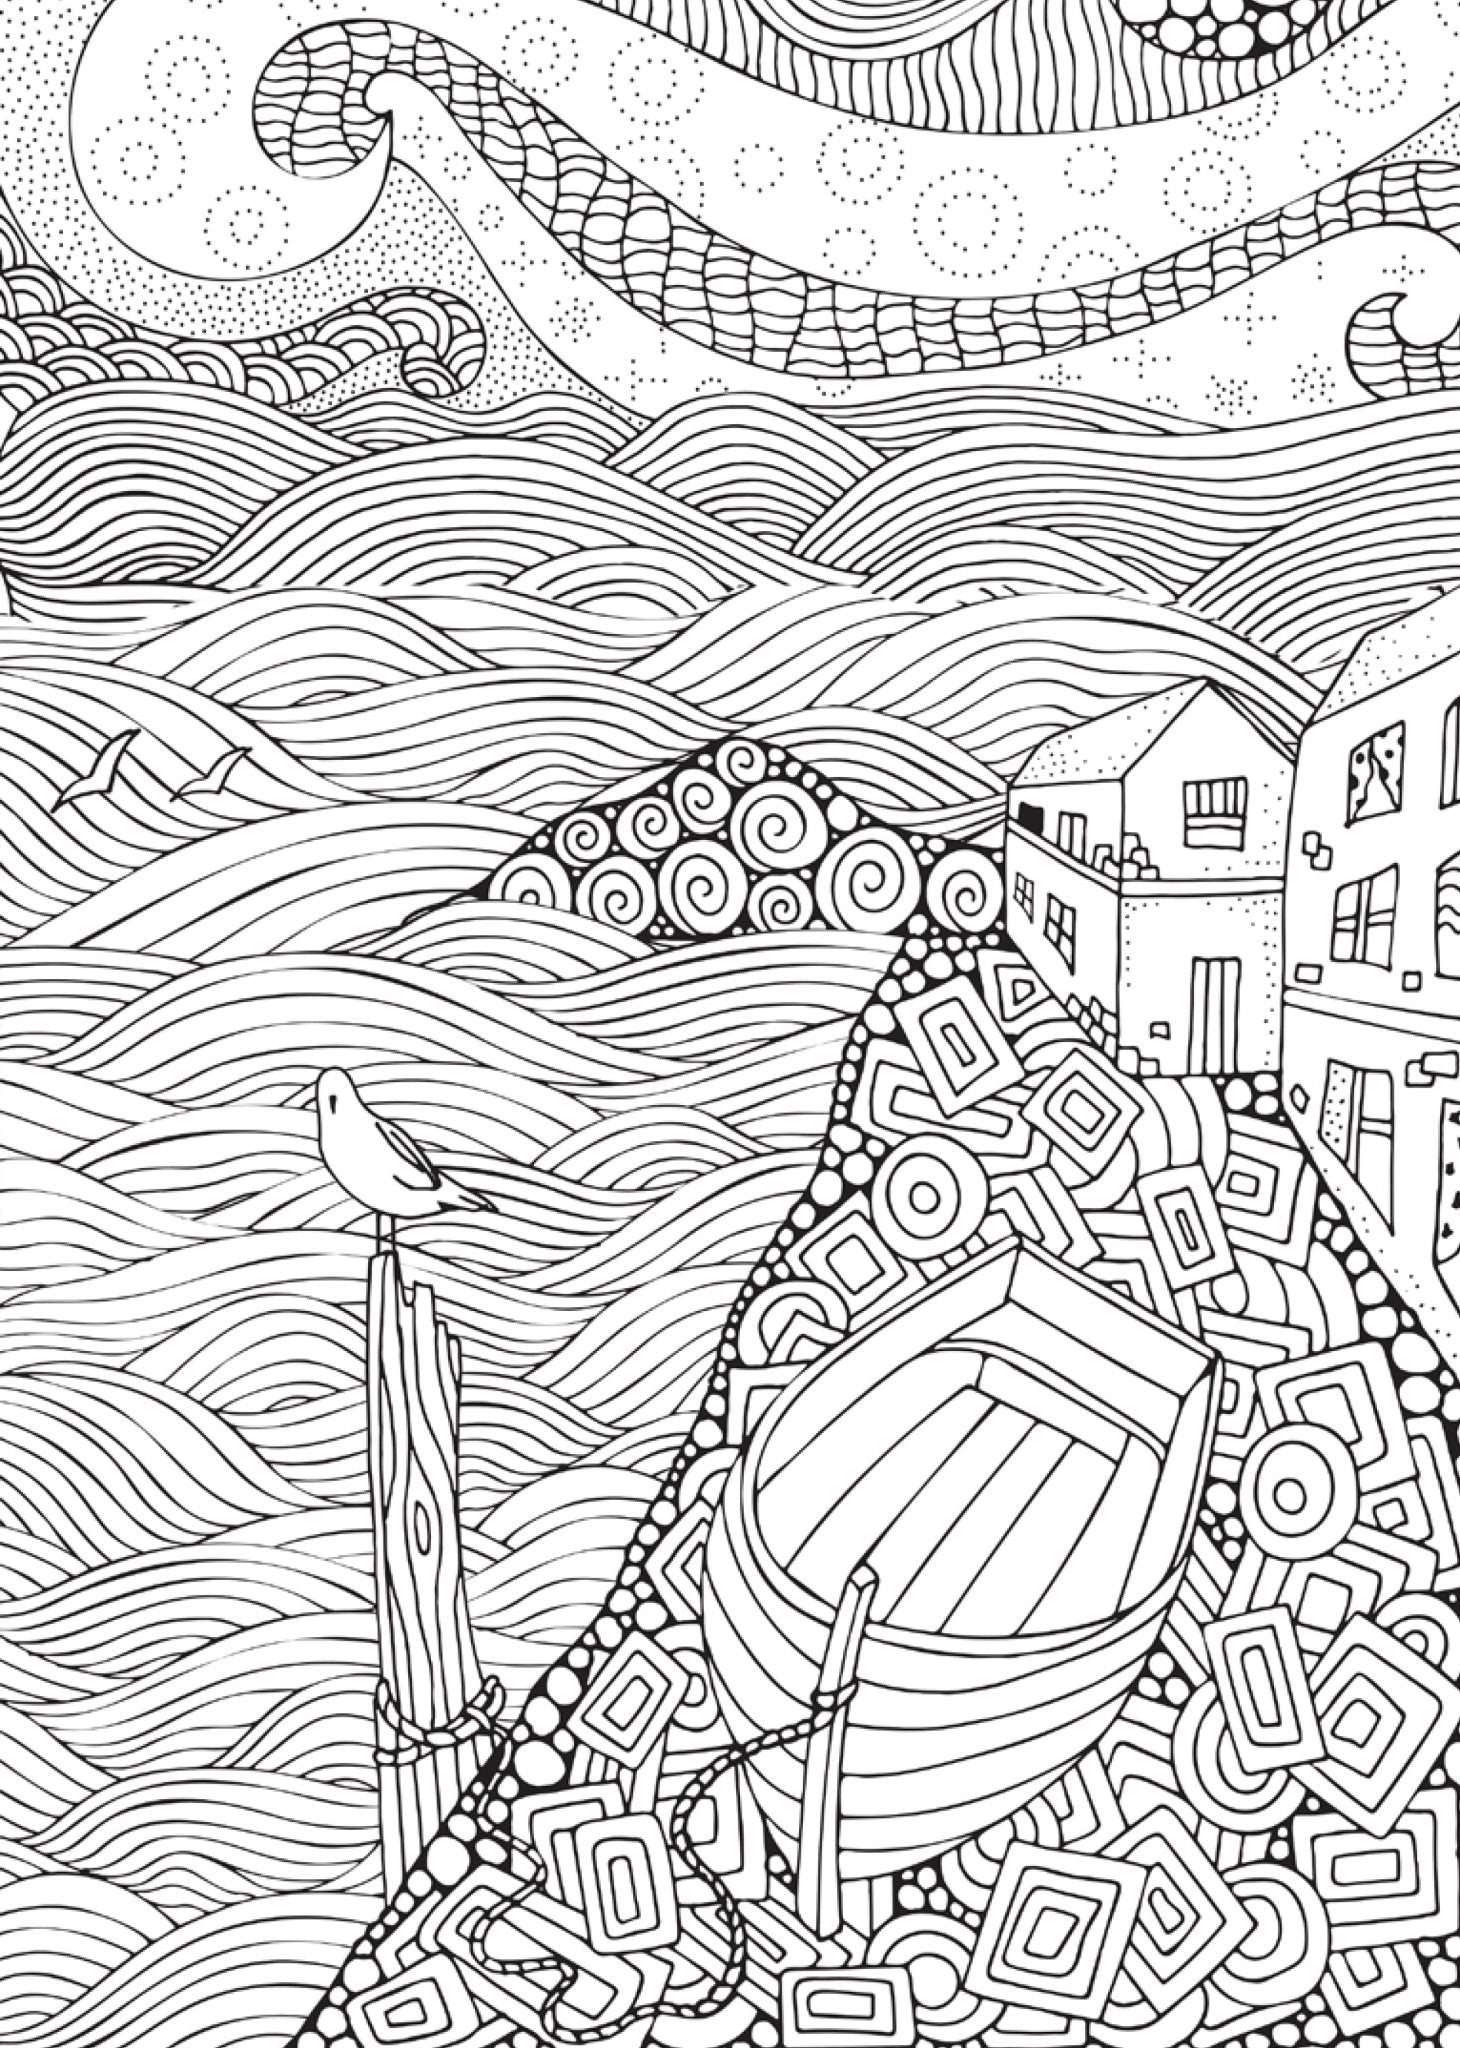 Seascapes Coloring Book for Adults (Digital) - Monsoon Publishing USA